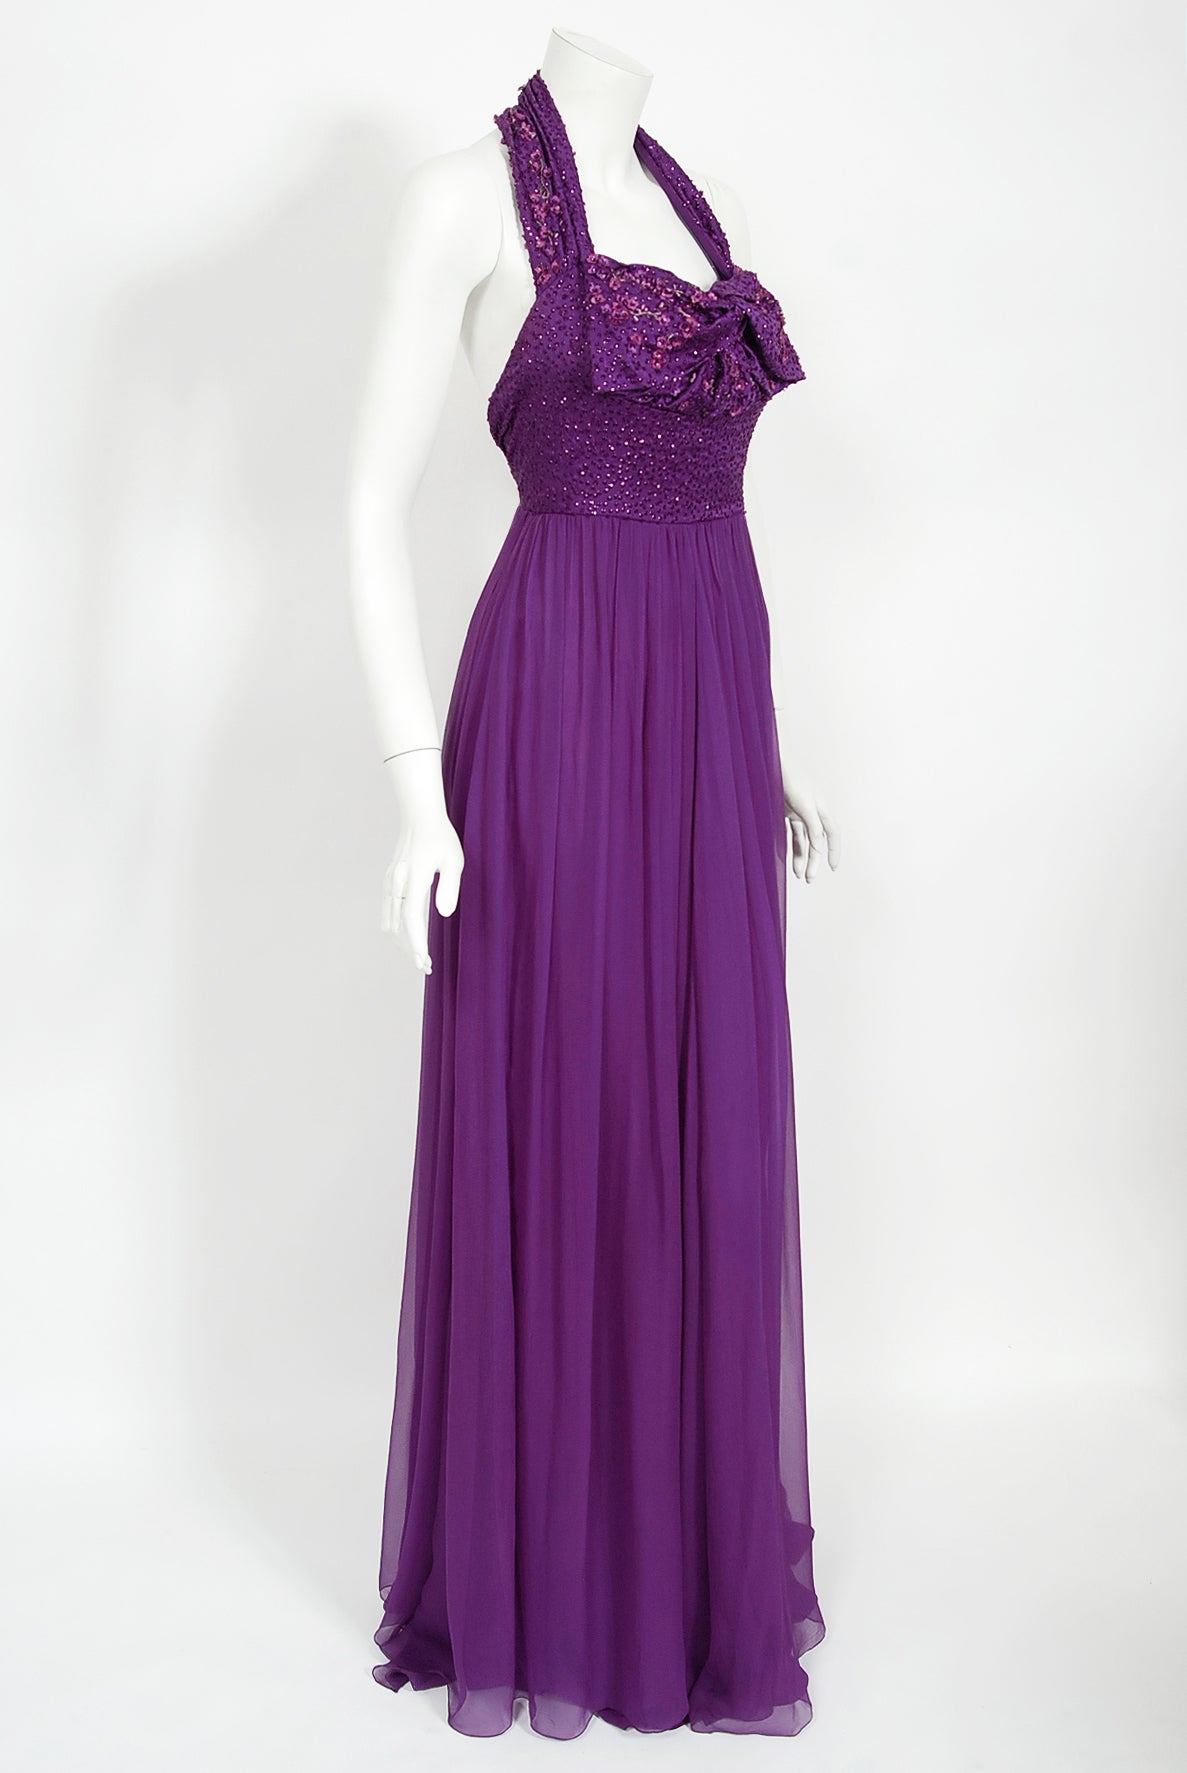 Vintage 2009 Christian Dior by Galliano Beaded Purple Silk Halter Backless Gown 5